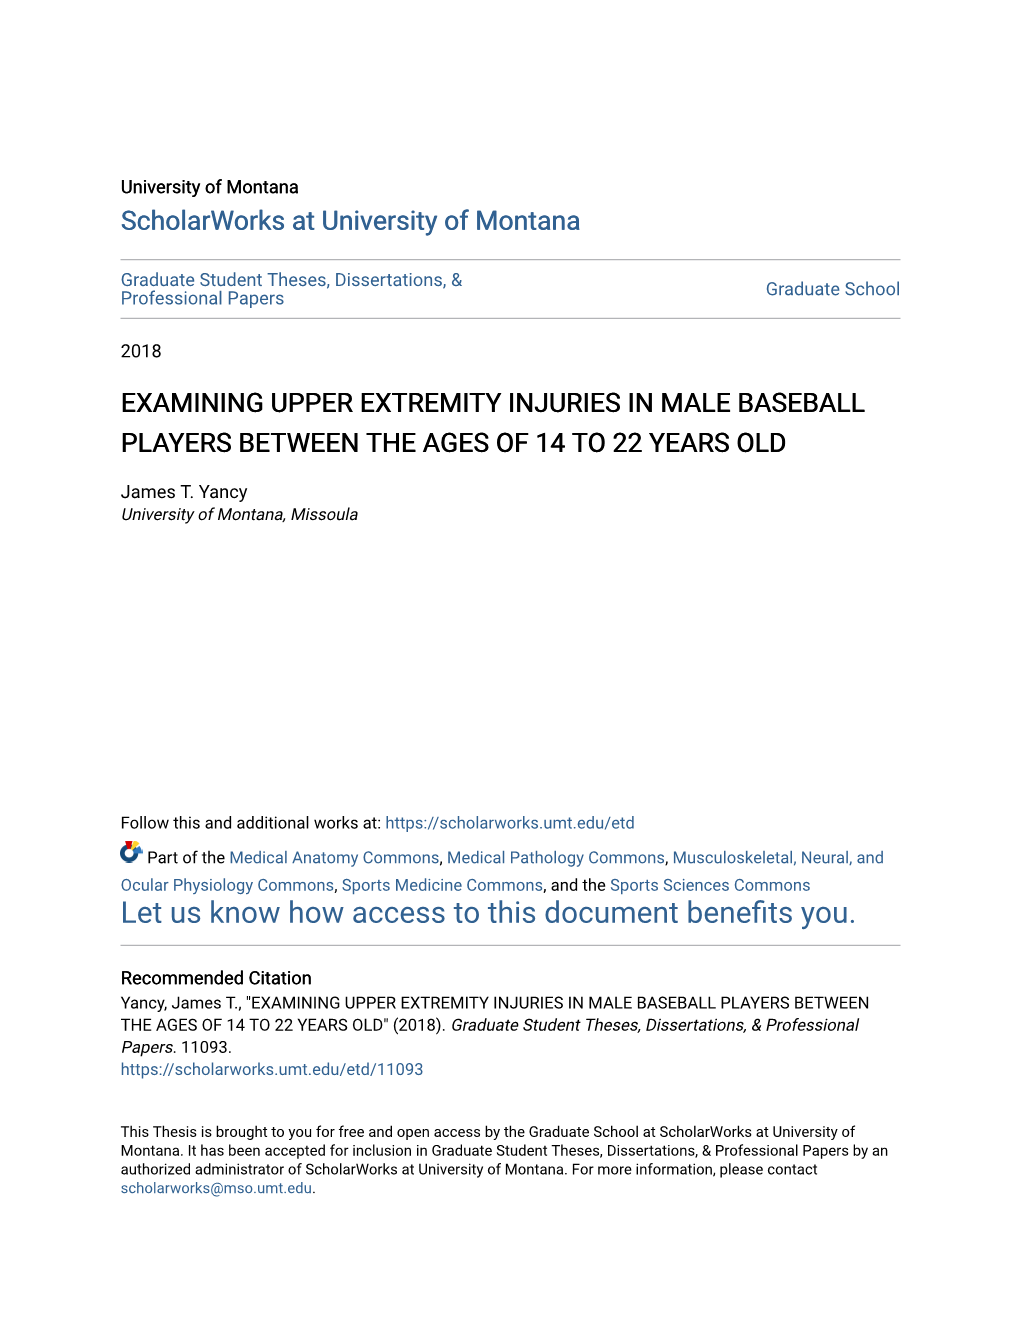 Examining Upper Extremity Injuries in Male Baseball Players Between the Ages of 14 to 22 Years Old